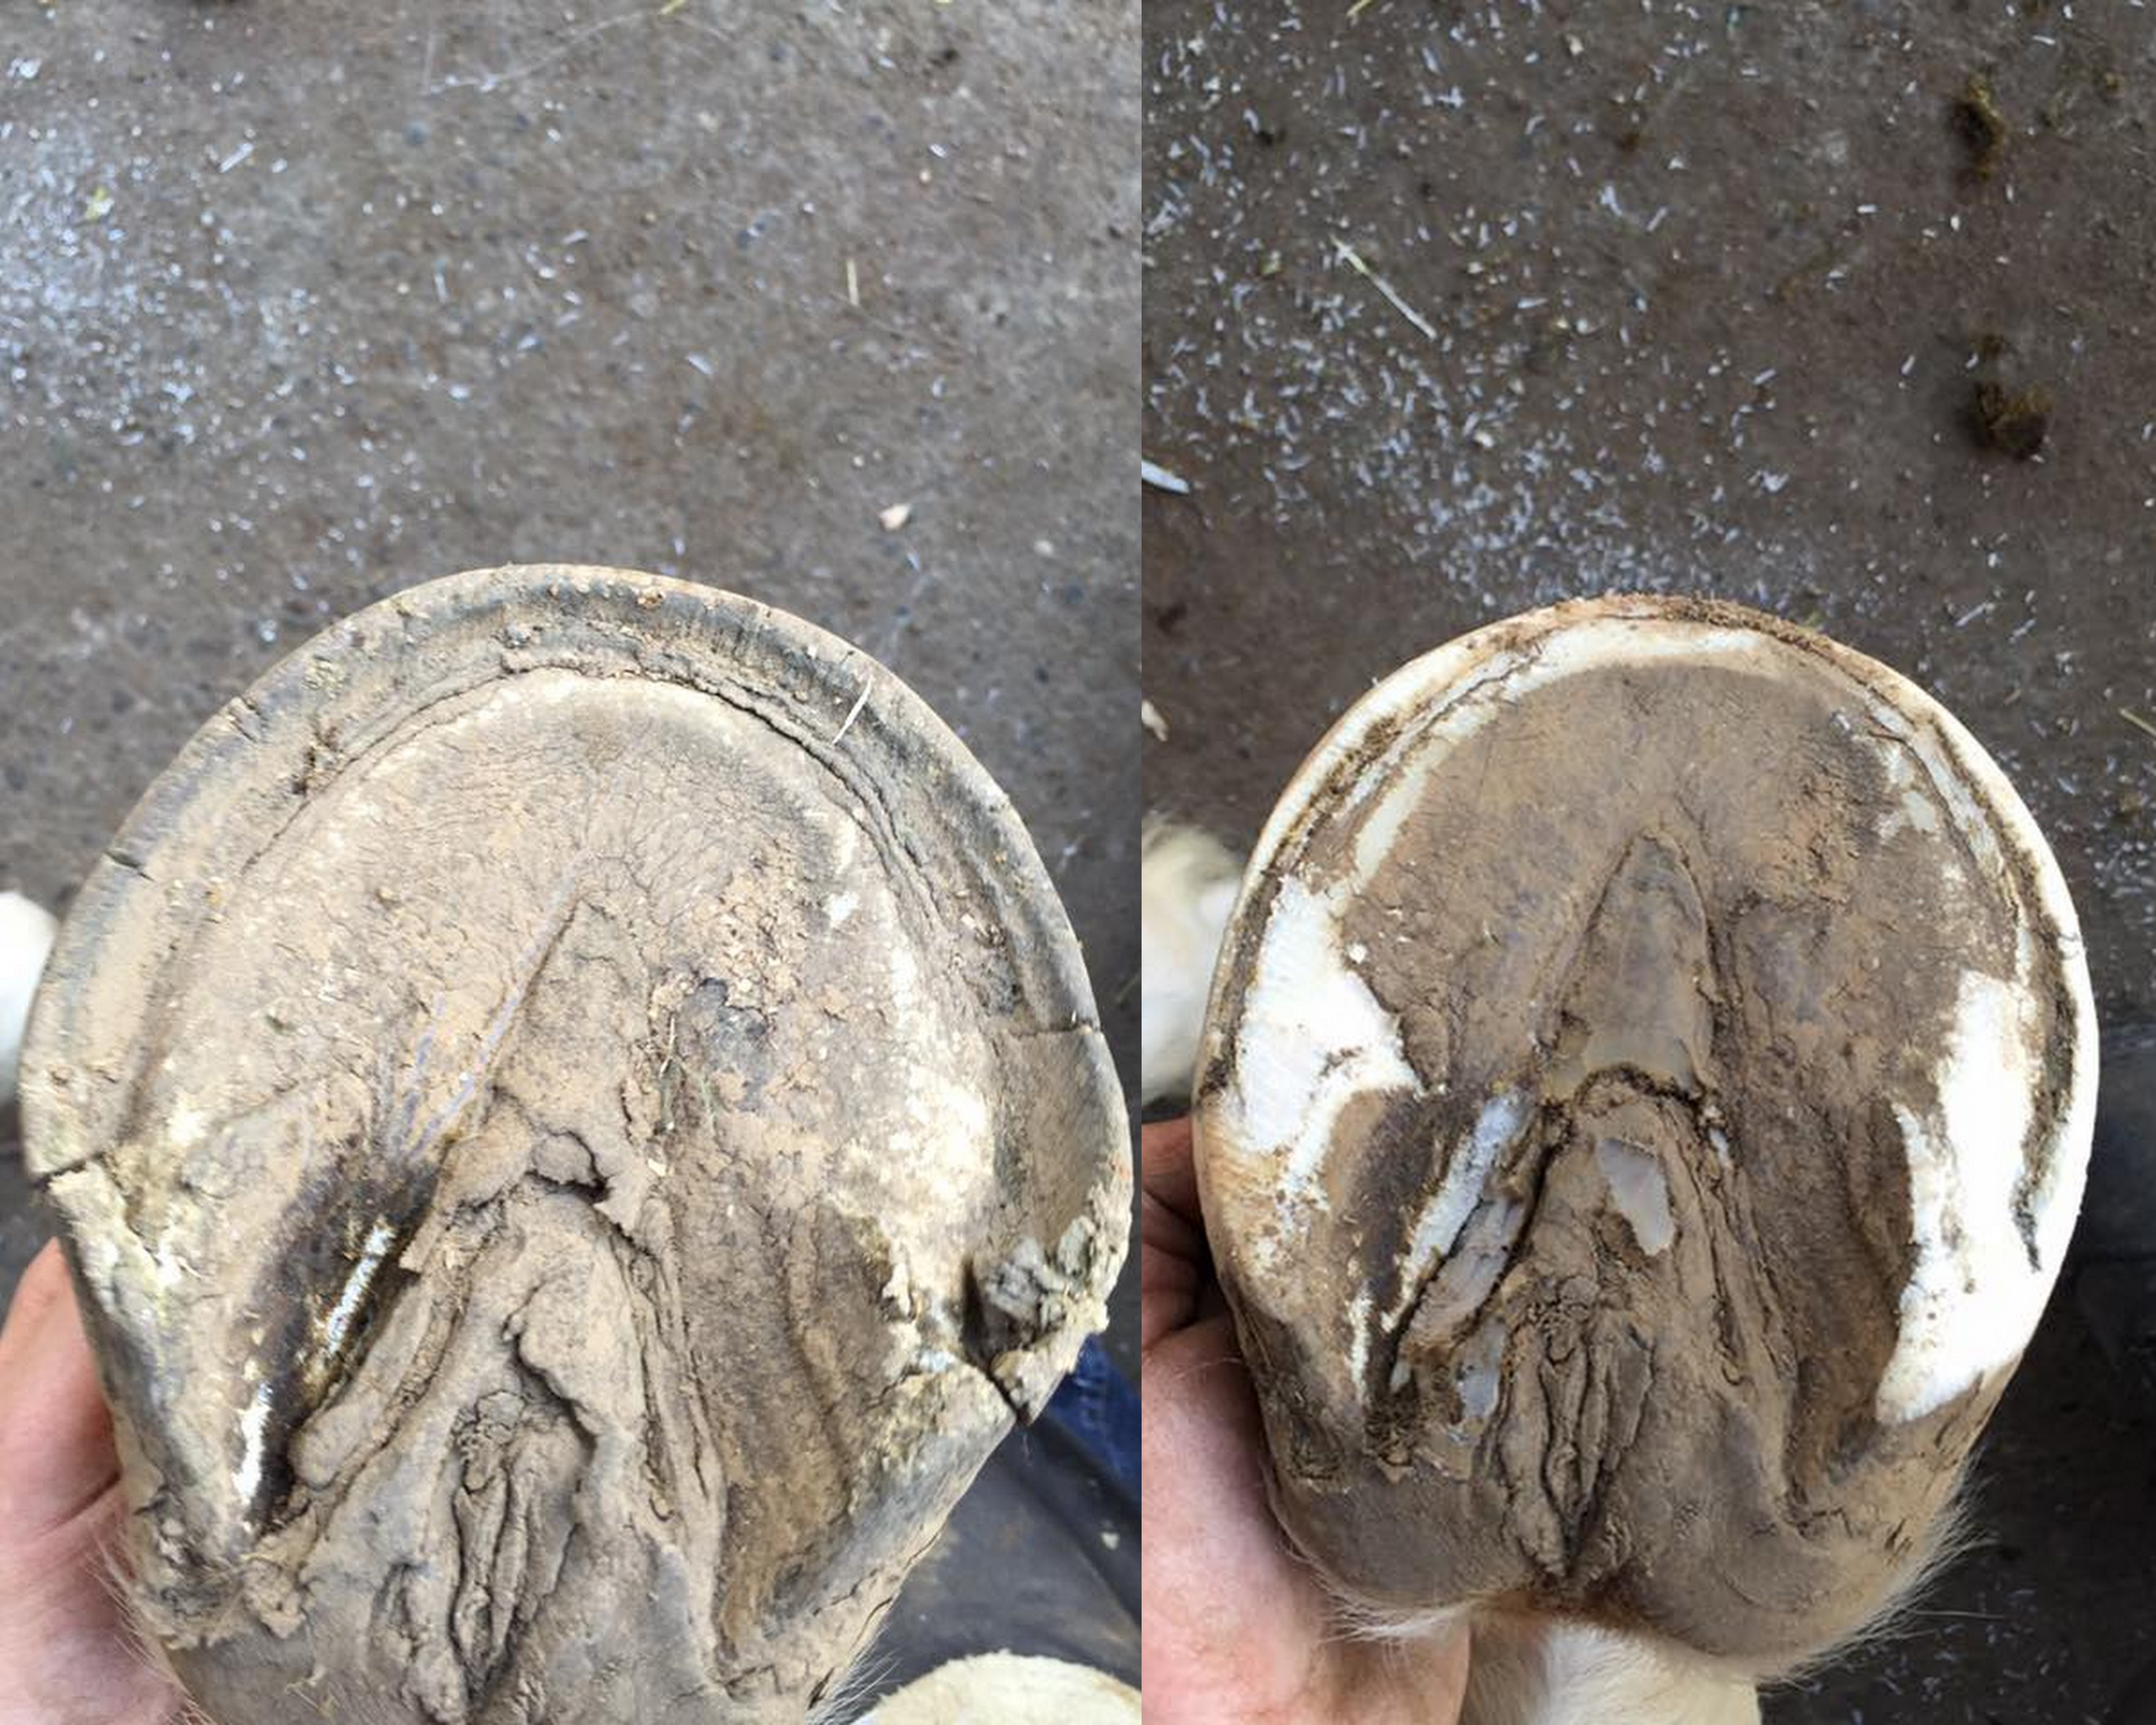 This is a great picture of how an overdue hoof starts to get quarter wall blow outs. See the cracks in the heels and quarter wall on each side? Horse steps wrong or on something and that whole piece gets torn off leaving not much to nail to if a shoe is needed, and possibly a sore foot. Very important to stay on a schedule. :) Glad this was caught before that happened. Cleaned up well.